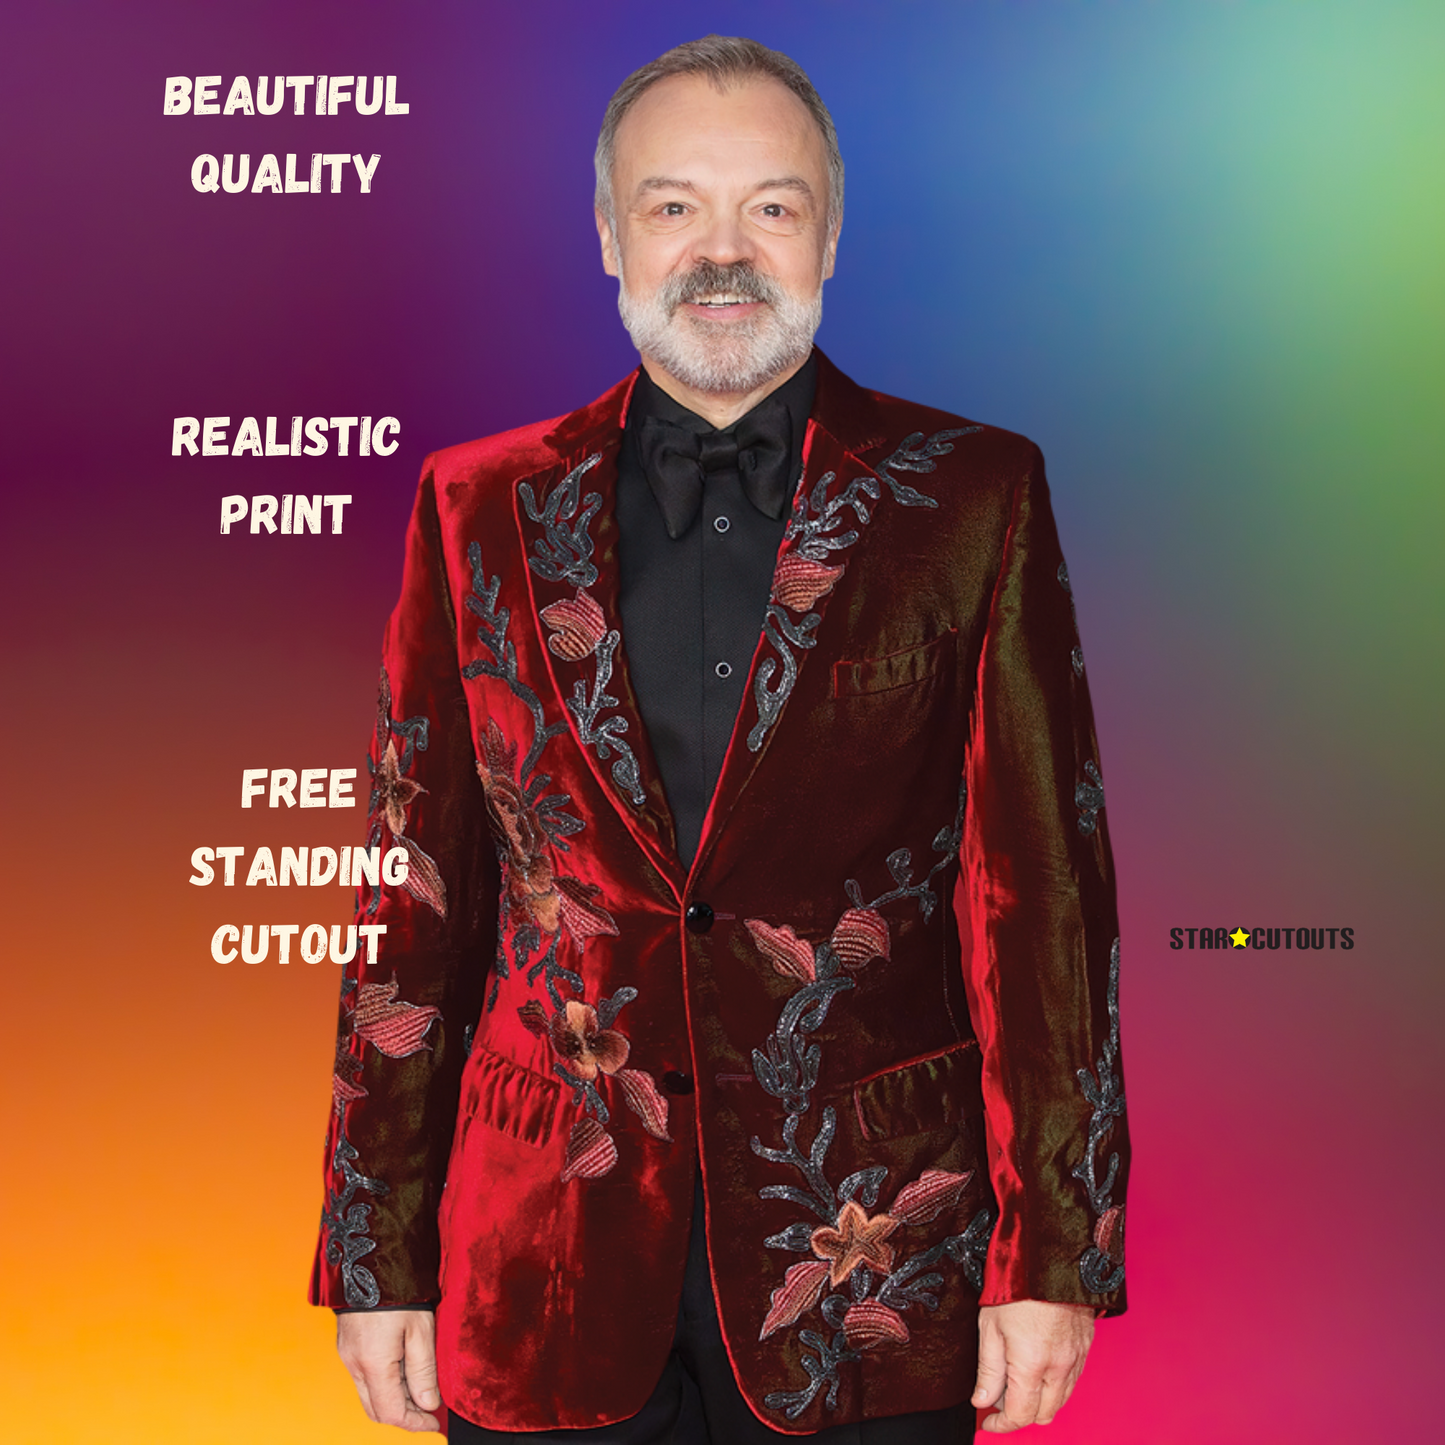 Graham Norton Cardboard Cut Out Life Size With Mini